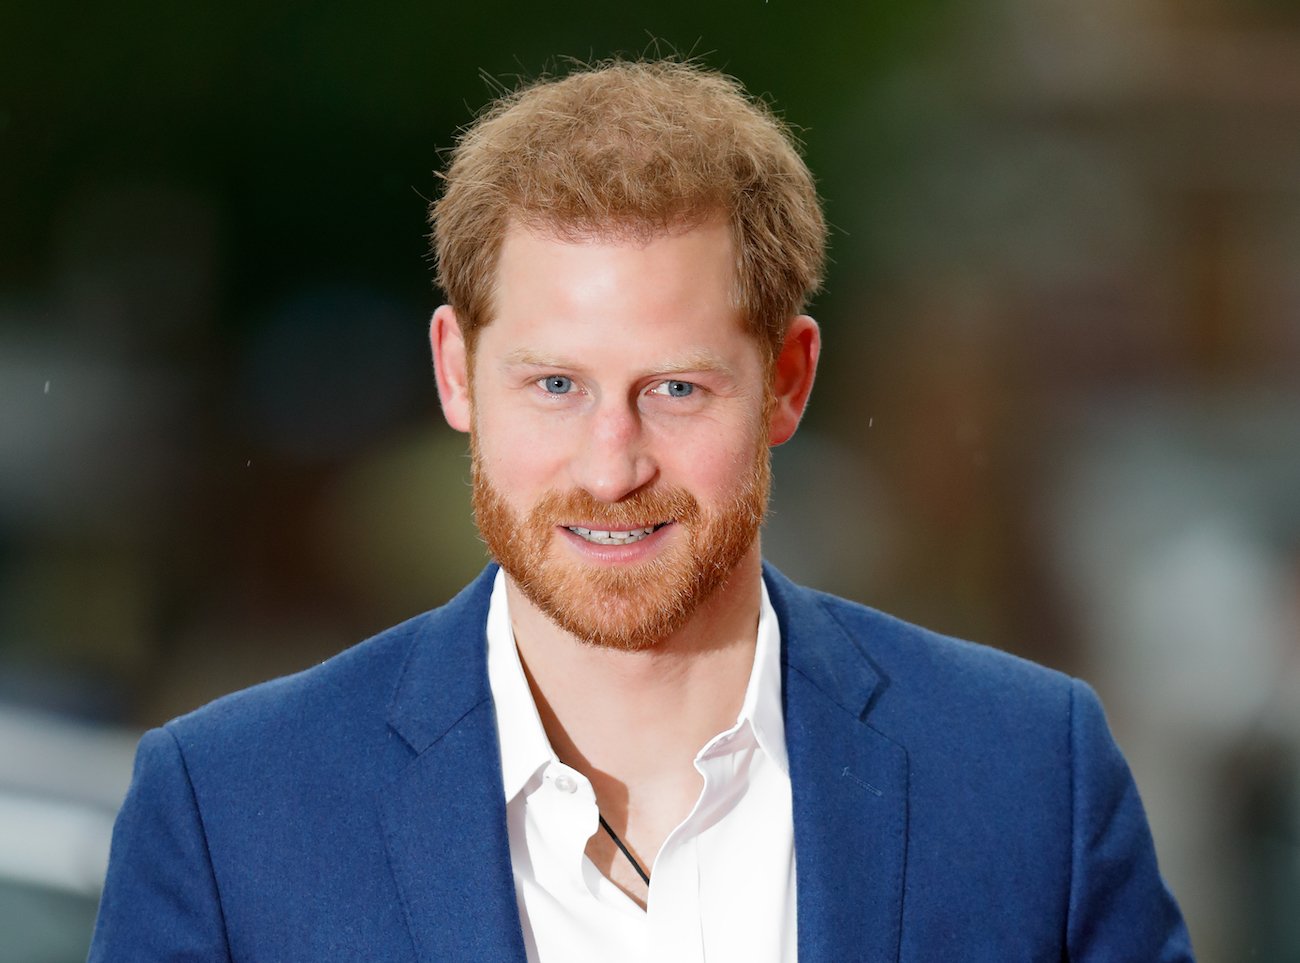 Body Language Expert Points Out How Prince Harry Displayed ‘Awkwardness’ and ‘Embarrassment’ During Latest Appearance